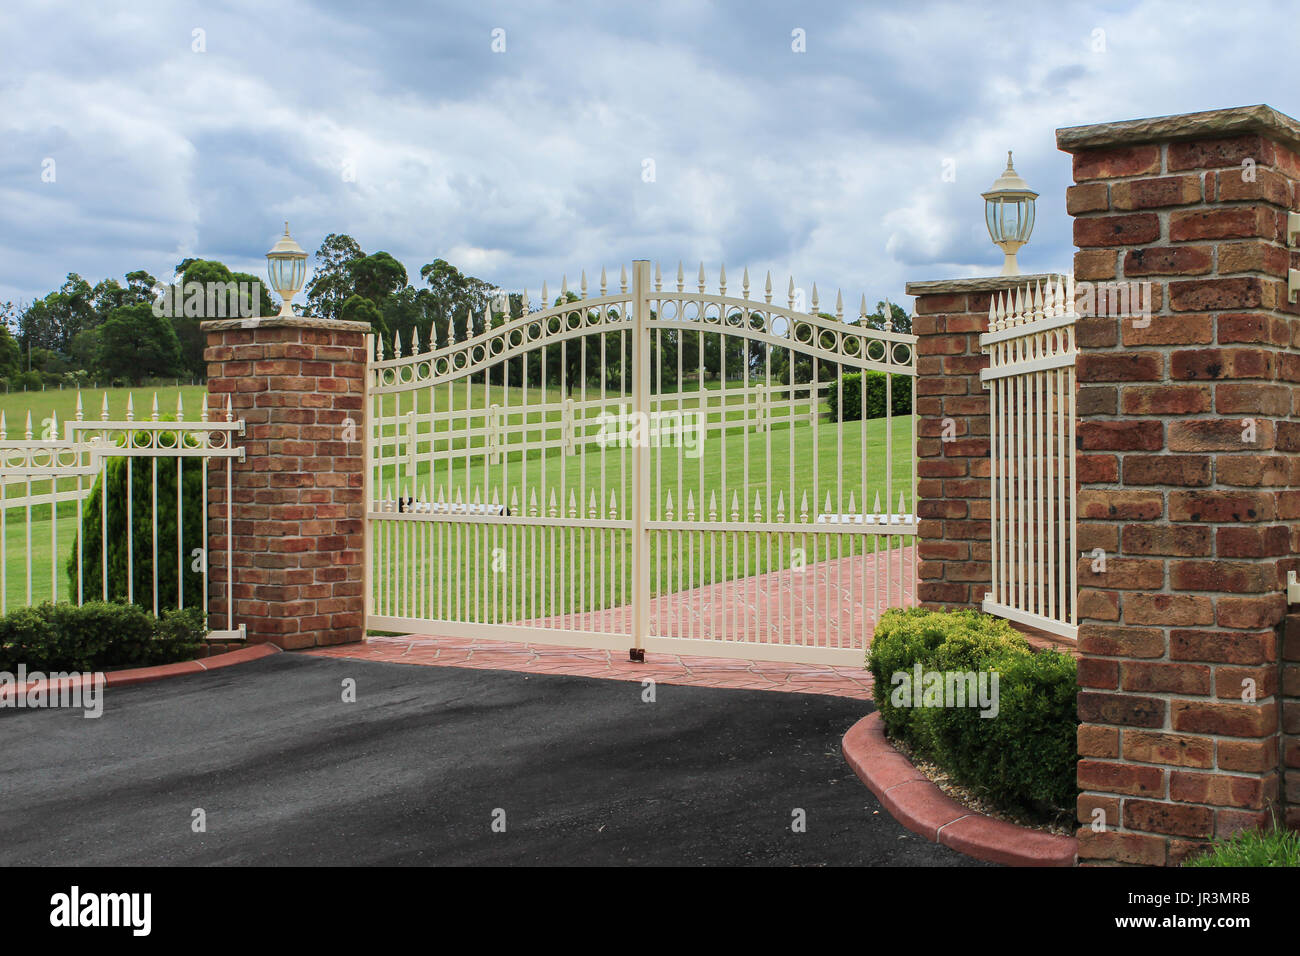 Metal Driveway Entrance Gates Set In Brick Fence With Garden Trees In Stock Photo Alamy,How To Cook A Prime Rib In The Oven